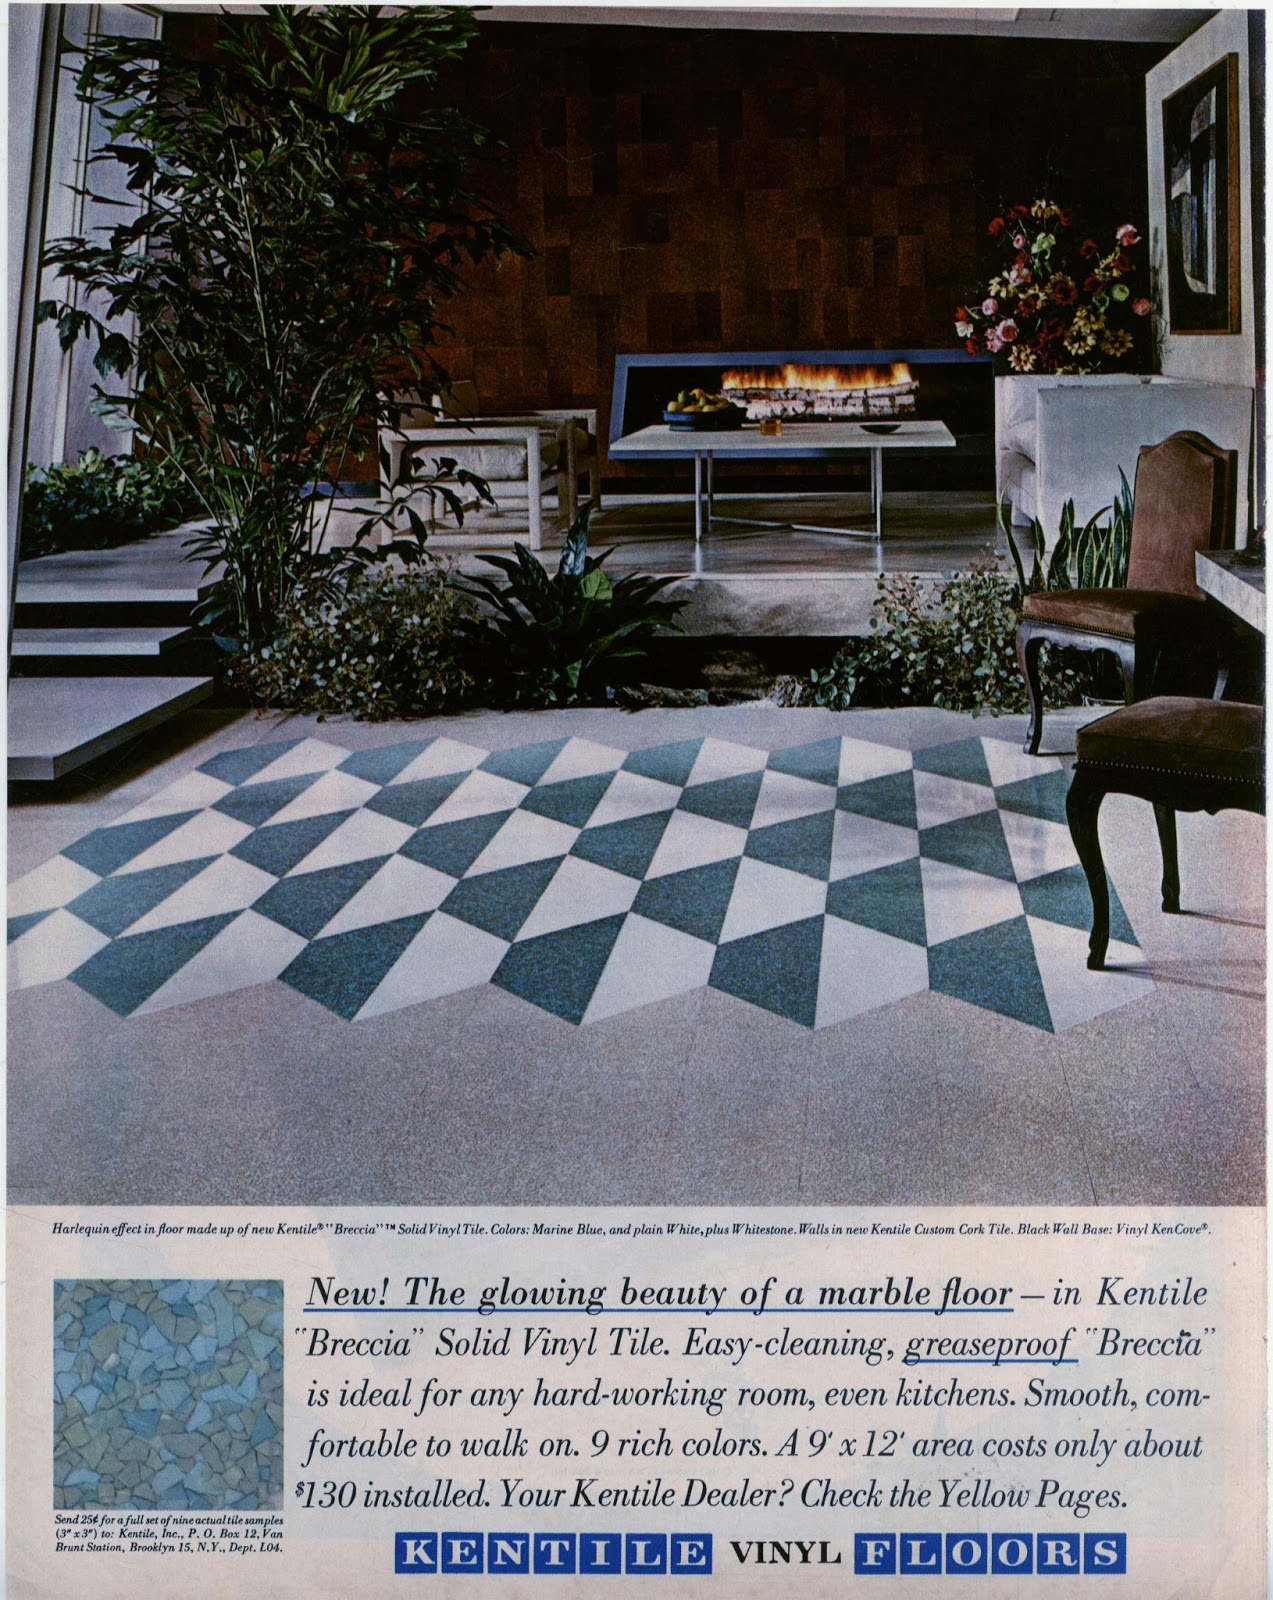 The Visual Primer of Advertising Cliches : Kentile Vinyl Flooring, the